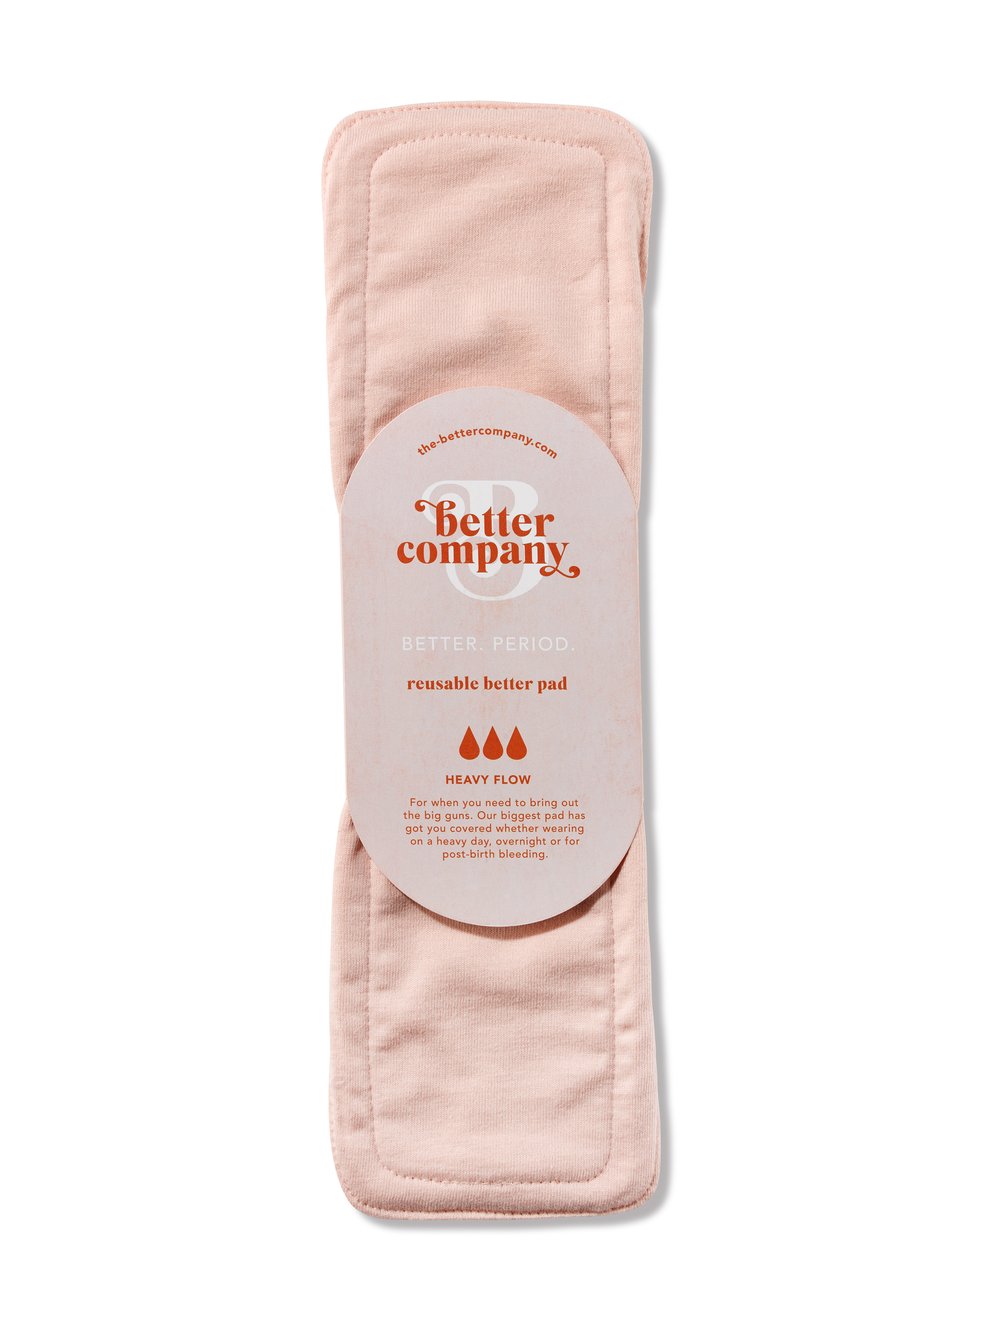 better pads. Made with super soft, breathable 100% organic cotton